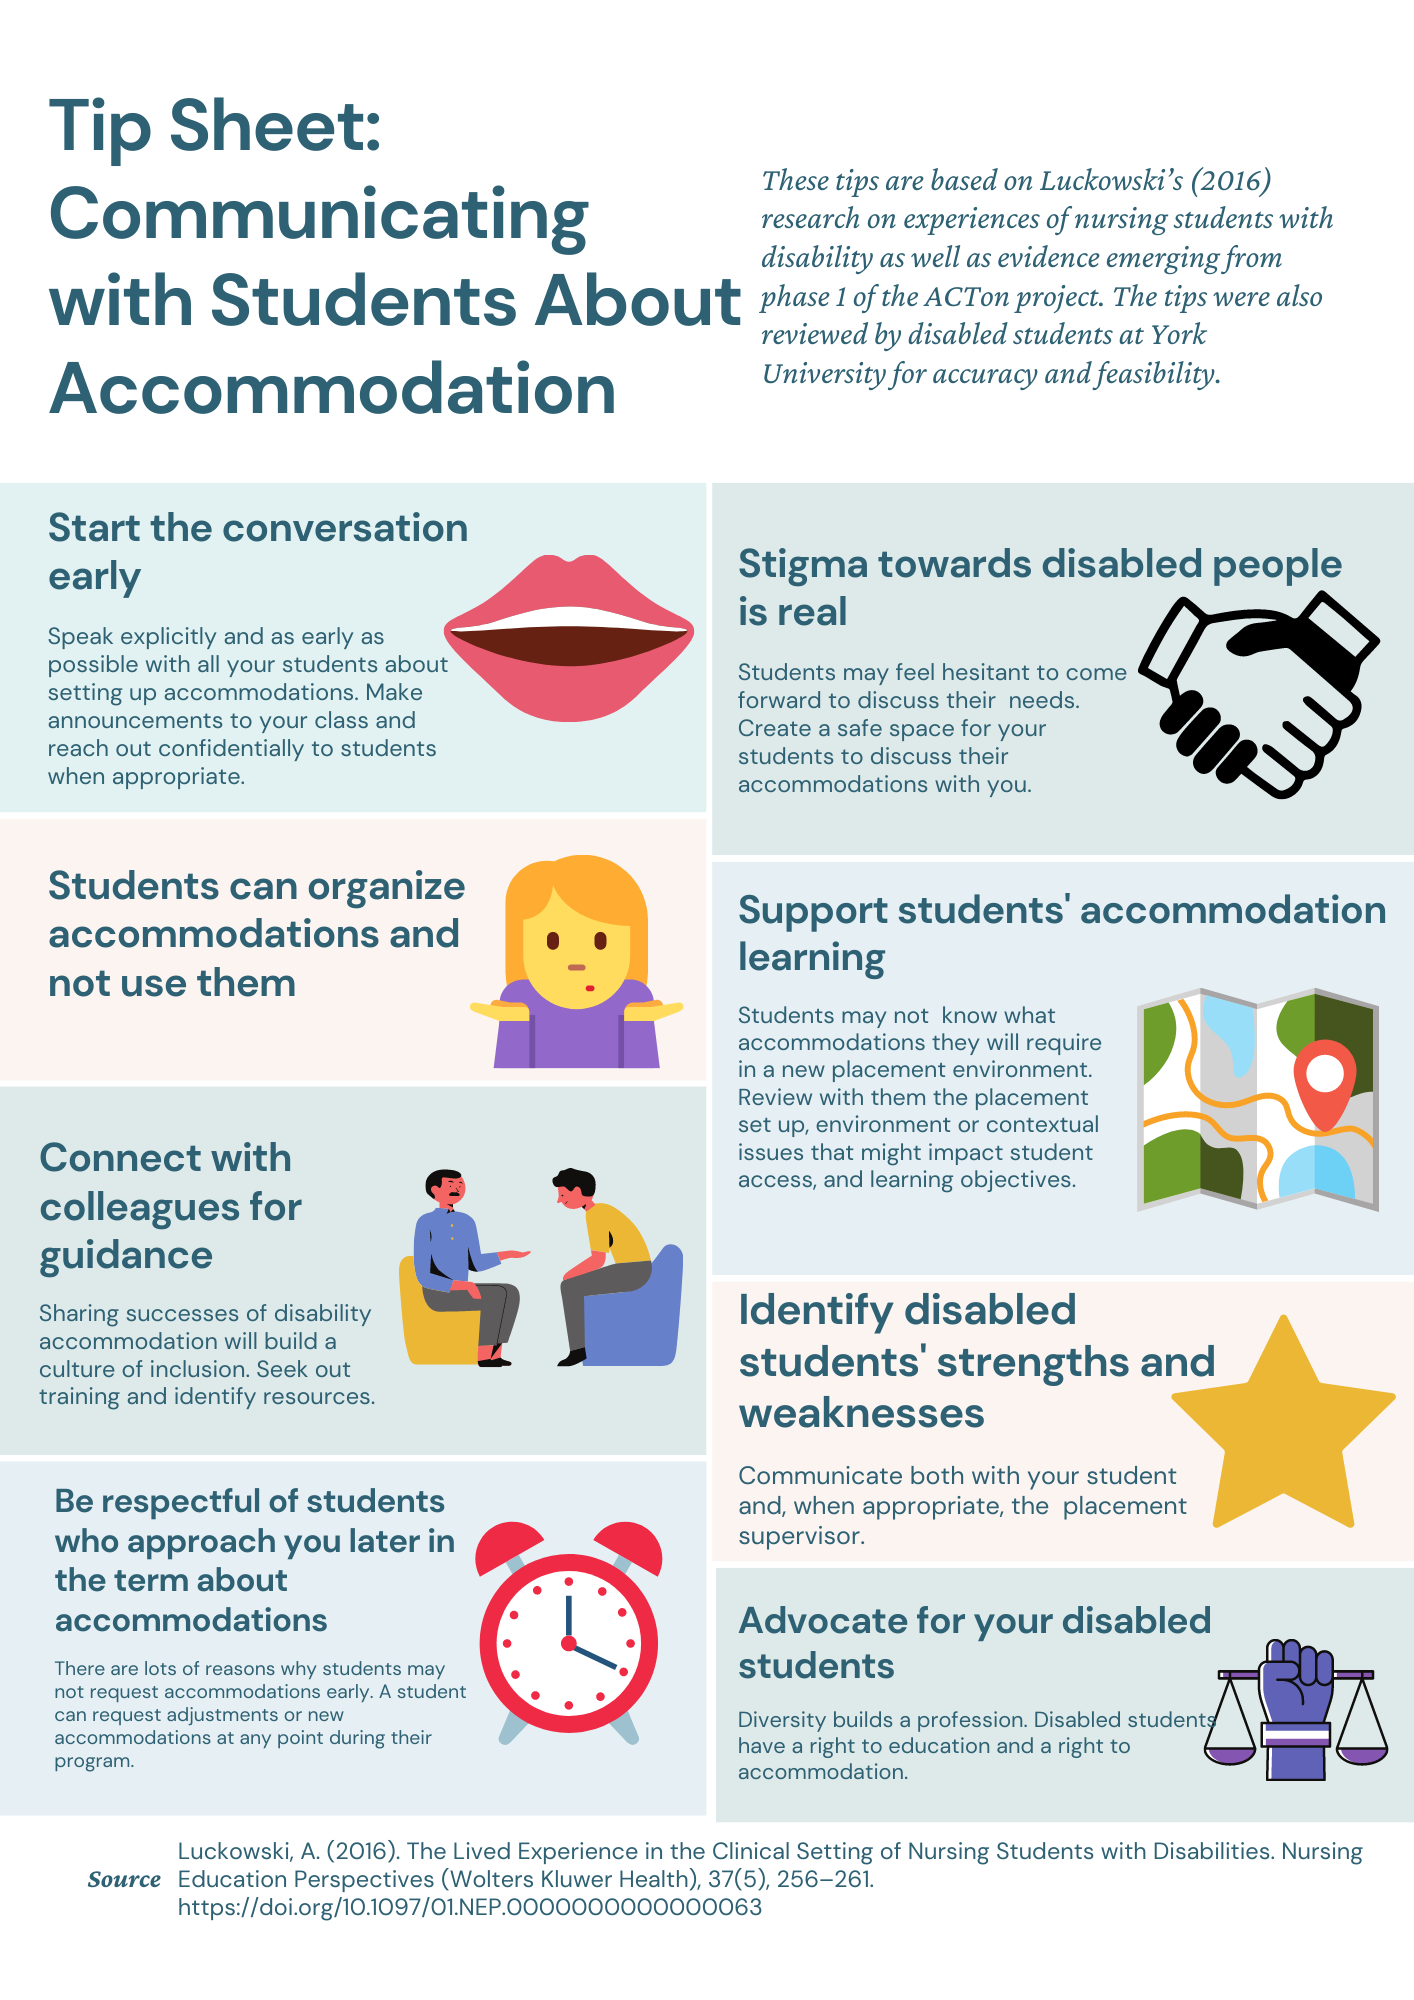 Tip Sheet for Instructors: 1) Start the conversation early. Speak explicitly and as early as possible with all your students about setting up accommodations. Make announcements to your class and reach out confidentially to students when appropriate. 2) Stigma towards disabled people is real. Students may feel hesitant to come forward to discuss their needs. Create a safe space for your students to discuss their accommodations with you. 3) Students can organize accommodations and not use them. 4) Support students' accommodation learning. Students may not know what accommodations they will require in a new placement environment. Review with them the placement set up, environment or contextual issues that might impact student access, and learning objectives. 5) Connect with colleagues for guidance. Sharing successes of disability accommodation will build a culture of inclusion. Seek out training and identify resources. 6) Identify disabled students' strengths and weaknesses. Communicate both with your student and, when appropriate, the placement supervisor. 7) Be respectful of students who approach you later in the term about accommodations. There are lots of reasons why students may not request accommodations early. A student can request adjustments or new accommodations at any point during their program. and 8) Advocate for your disabled students. Diversity builds a profession. Disabled students have a right to education and a right to accommodation.